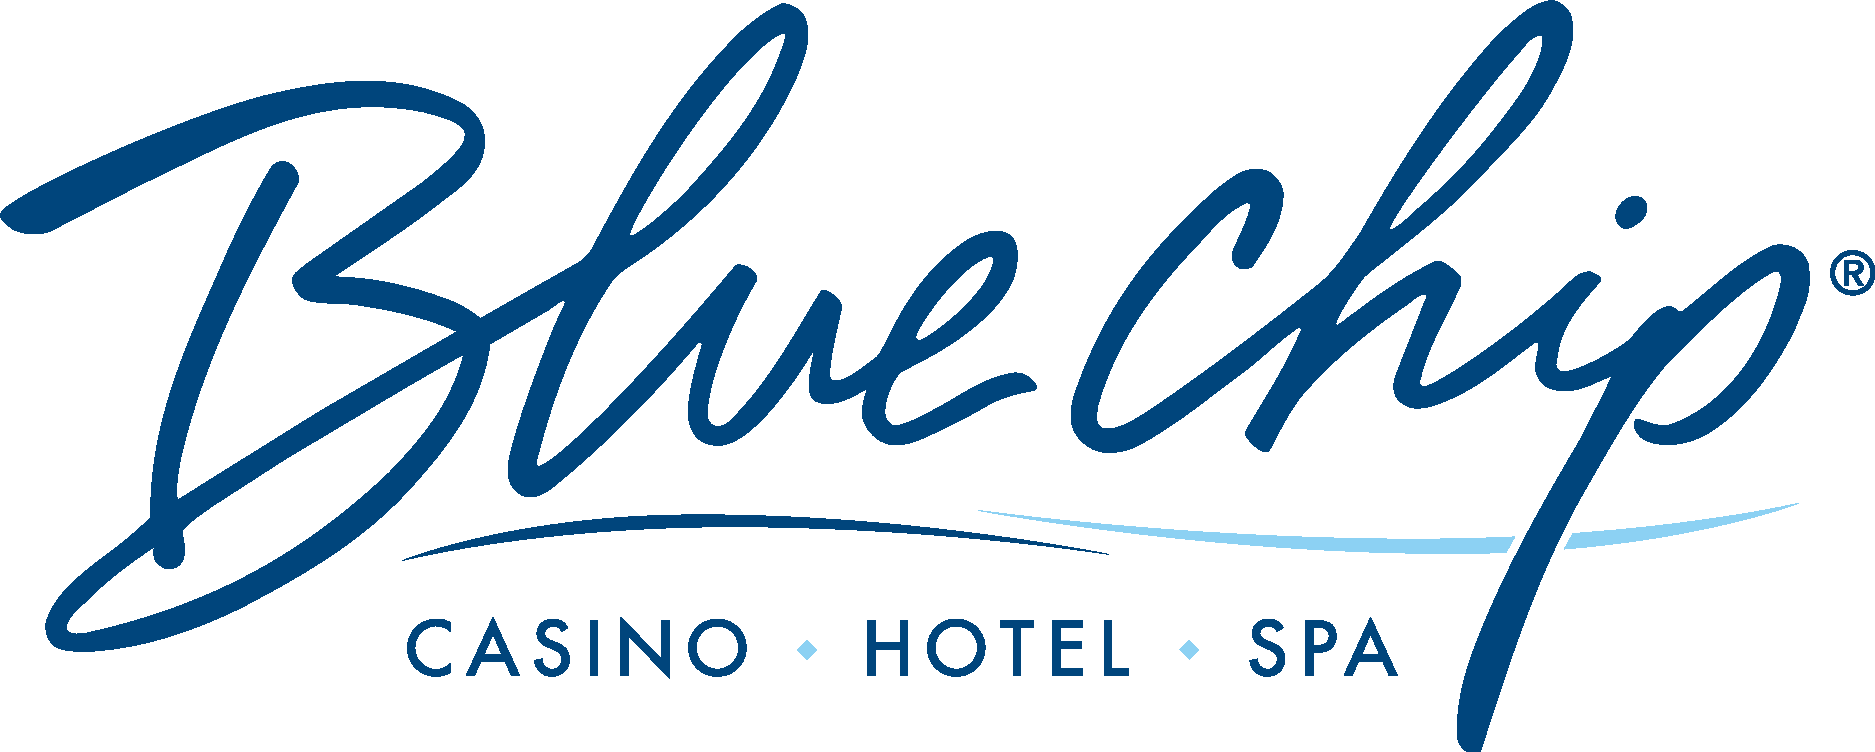 Blue Chip Casino Hotel and Spa Logo Vector